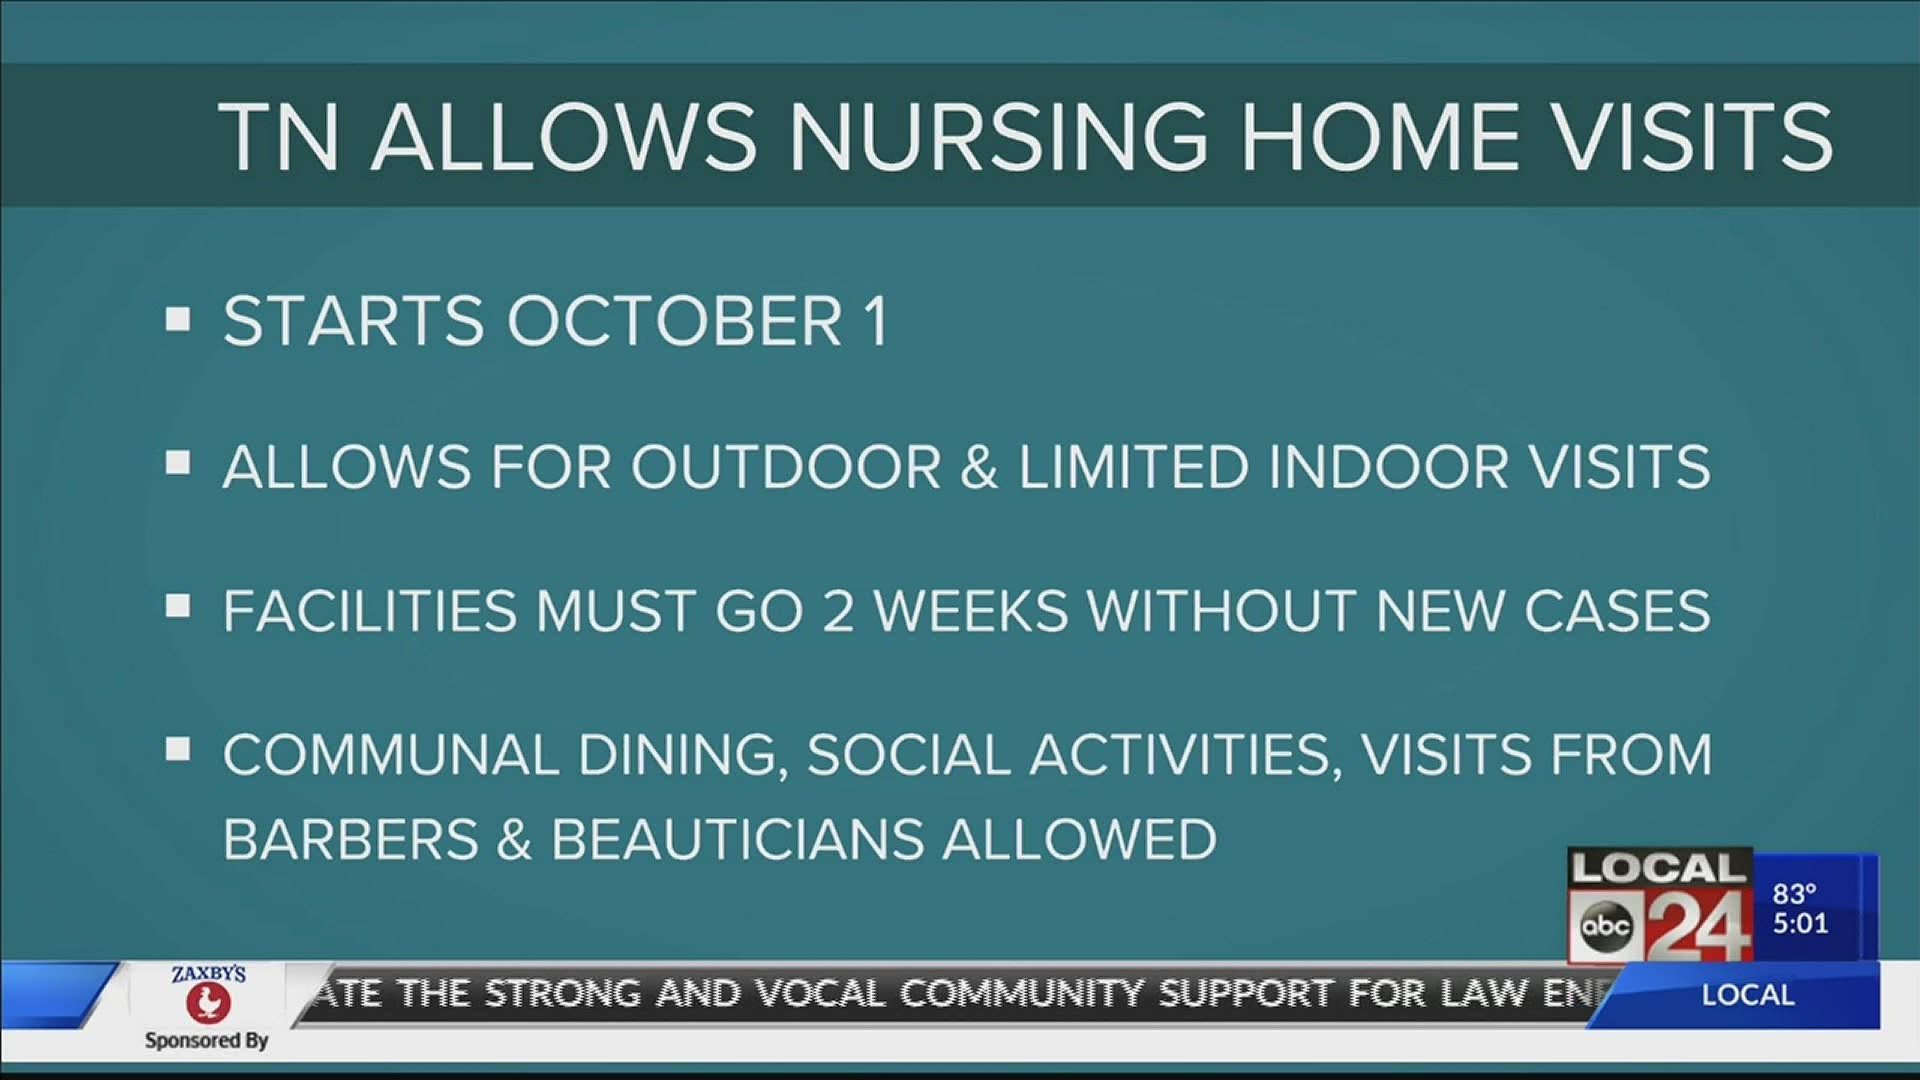 Beginning October 1, 2020 facilities that have gone at least 14 days with no new COVID-19 cases will be allowed to offer outdoor or limited indoor visitation.